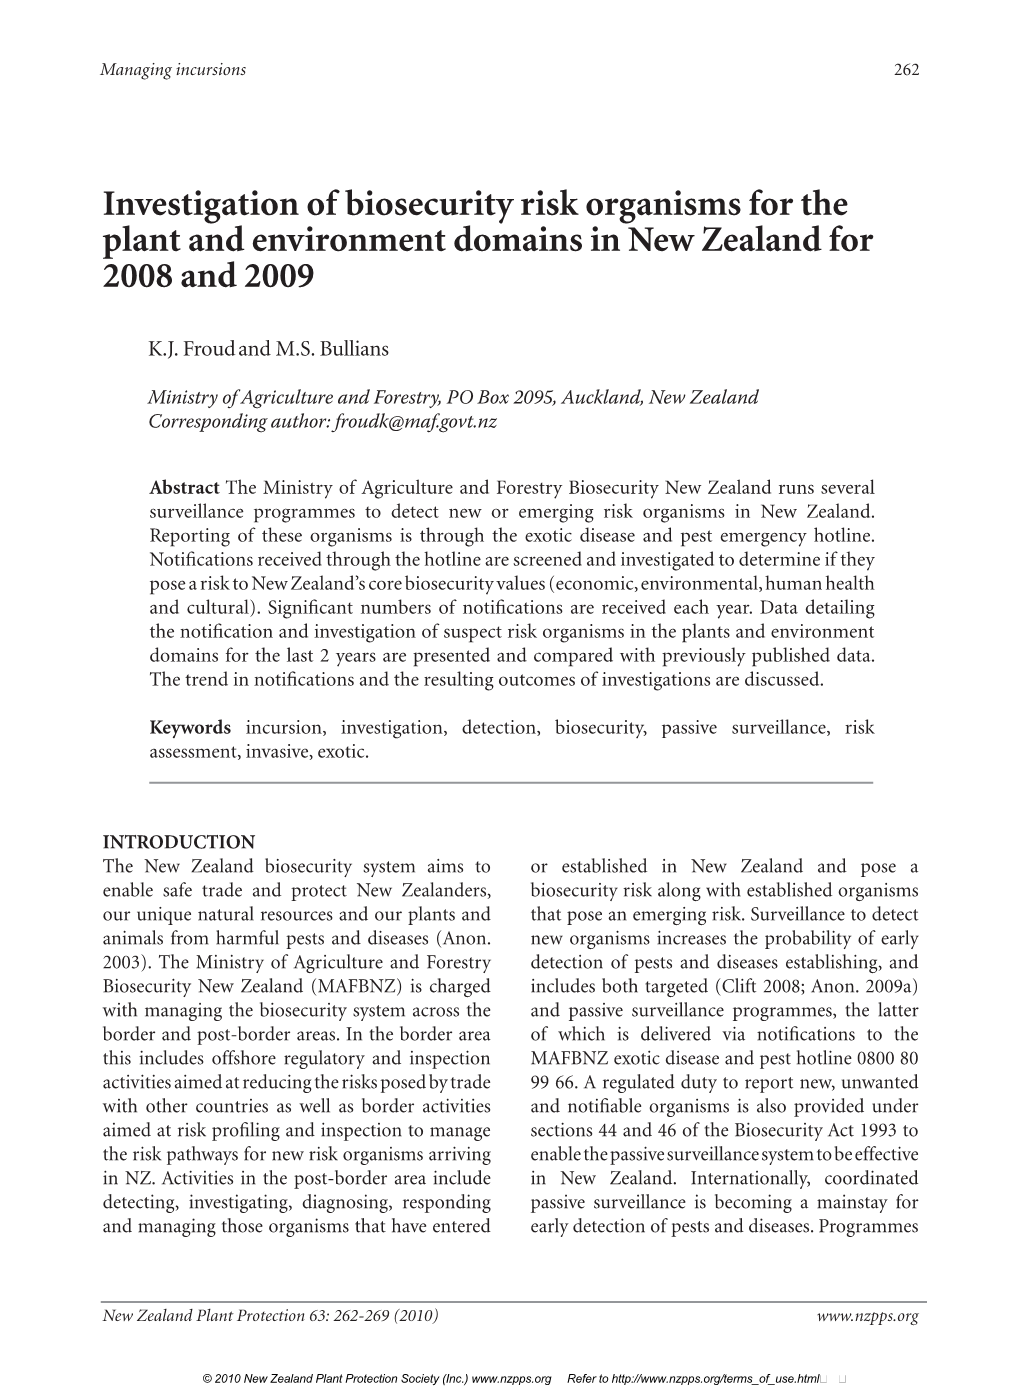 Investigation of Biosecurity Risk Organisms for the Plant and Environment Domains in New Zealand for 2008 and 2009